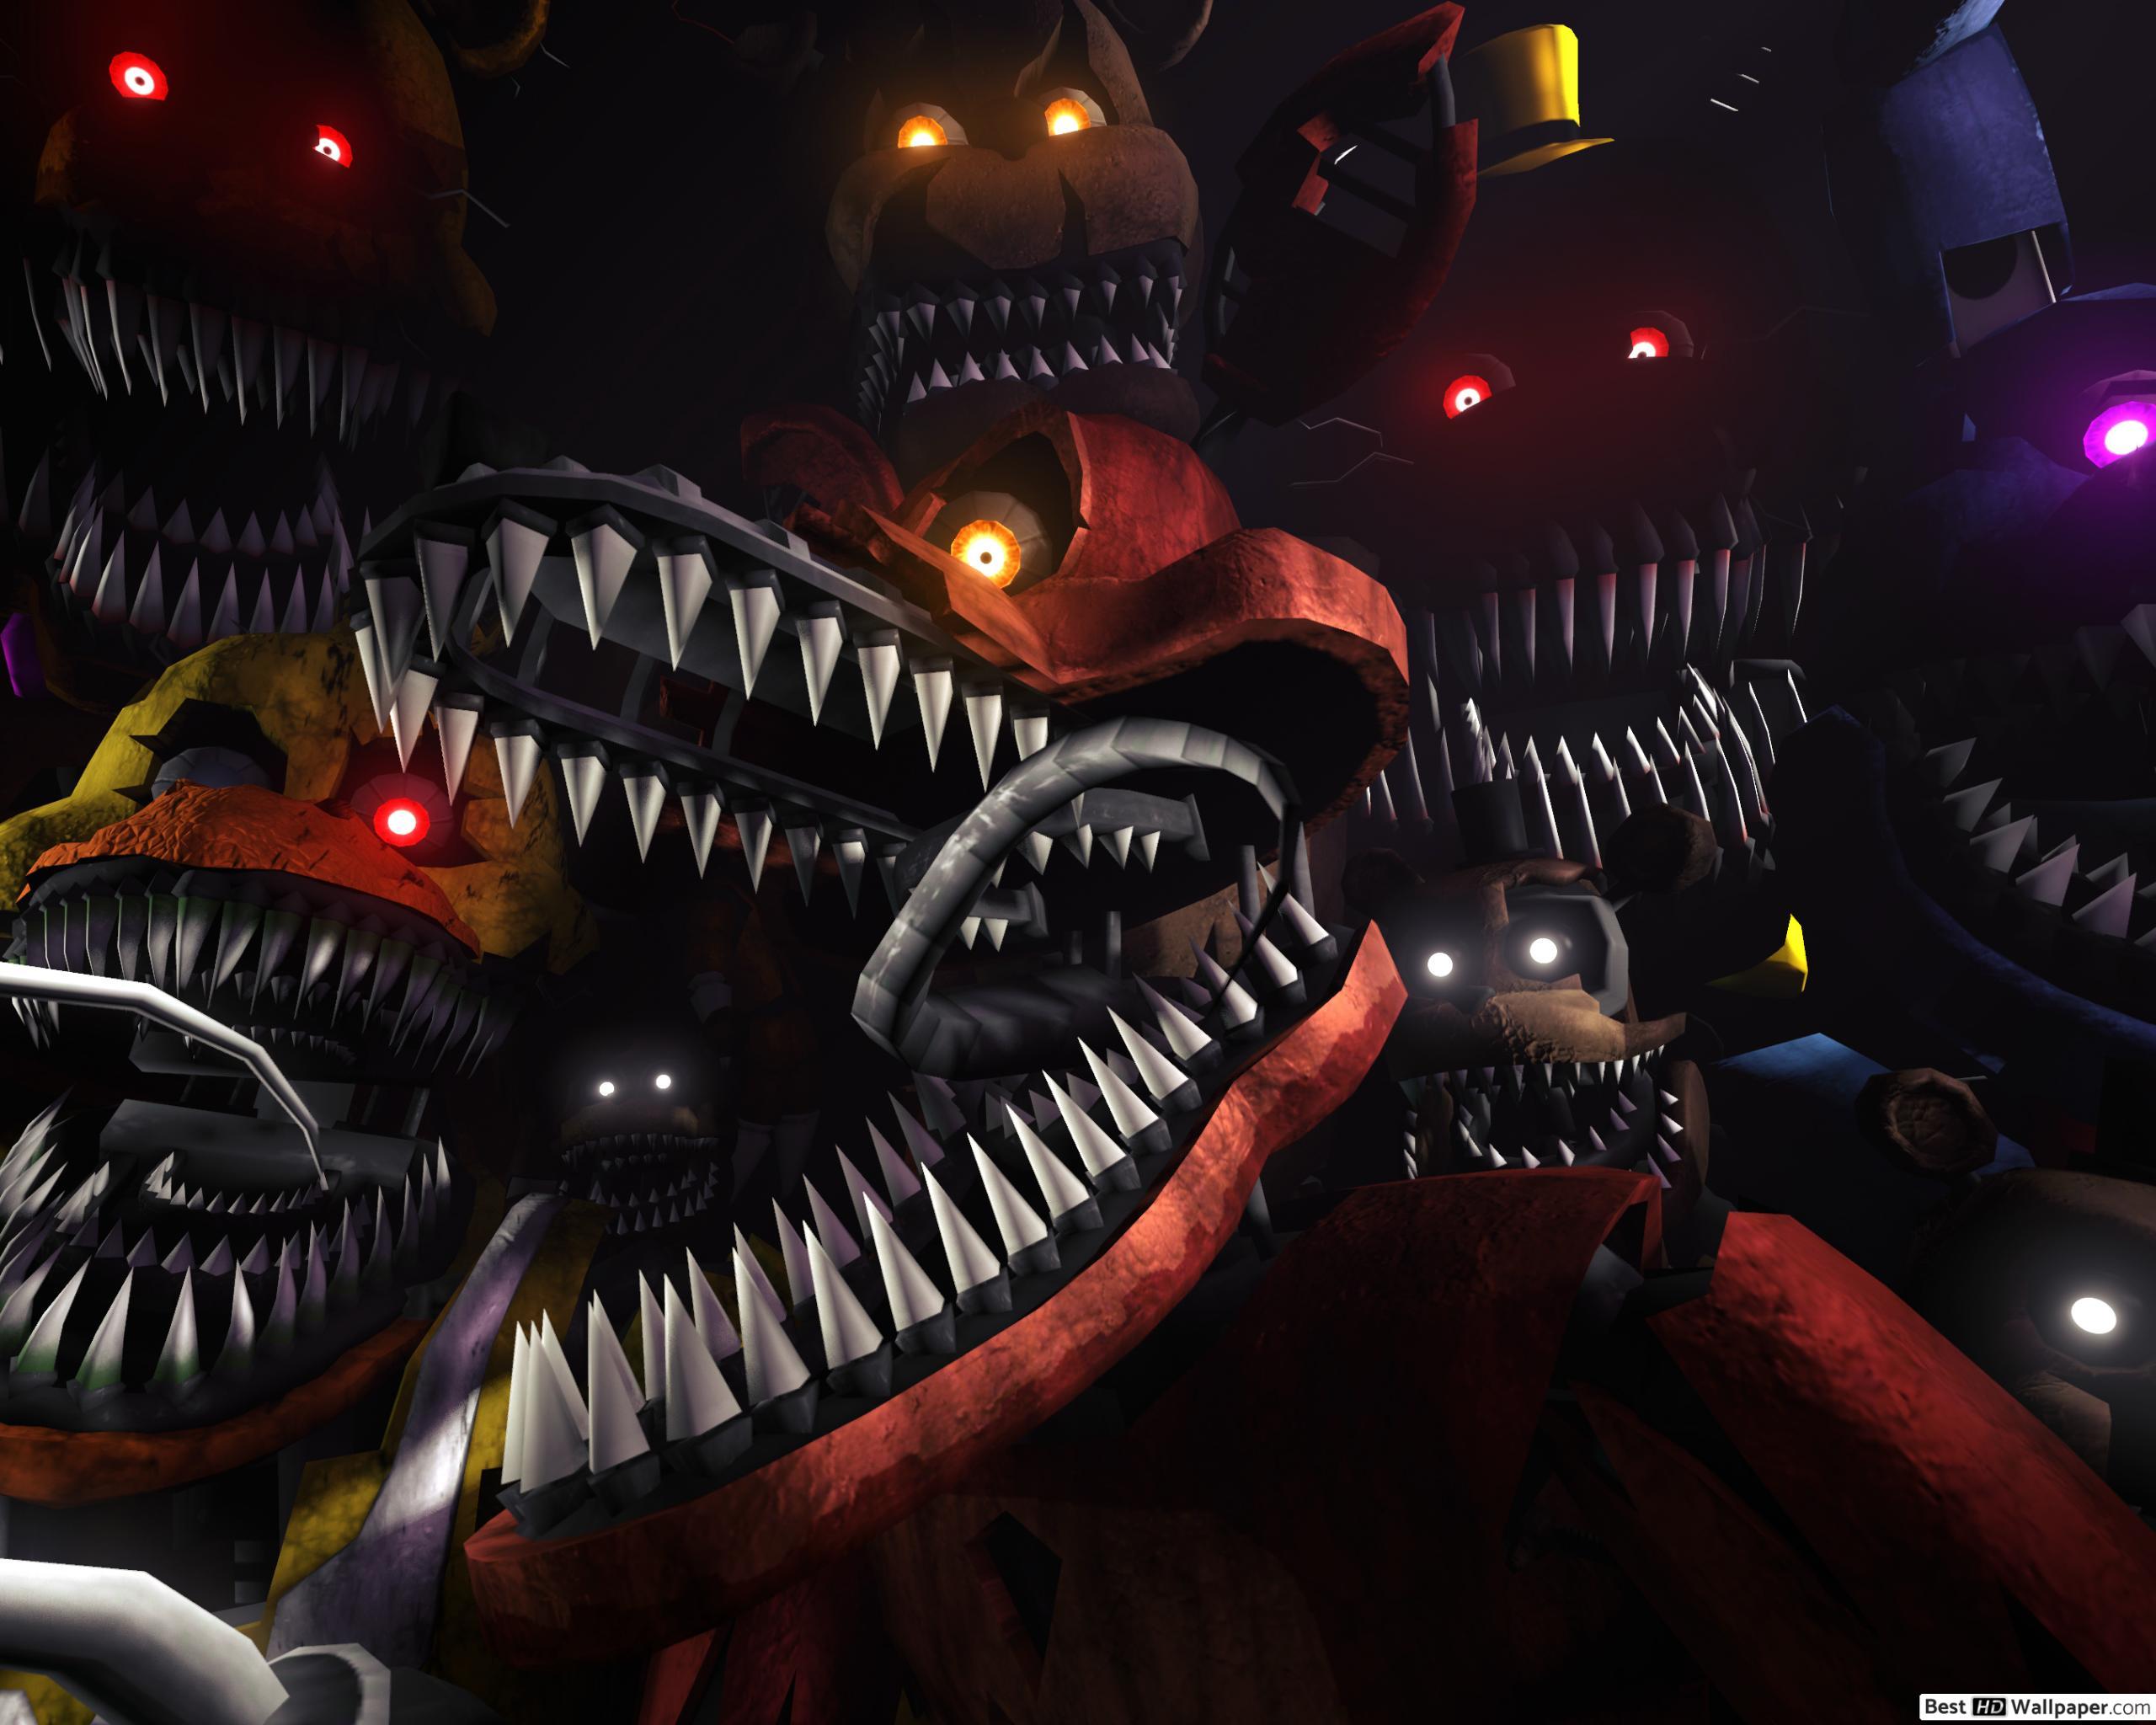 Five nights at freddy's 4 HD wallpapers download.